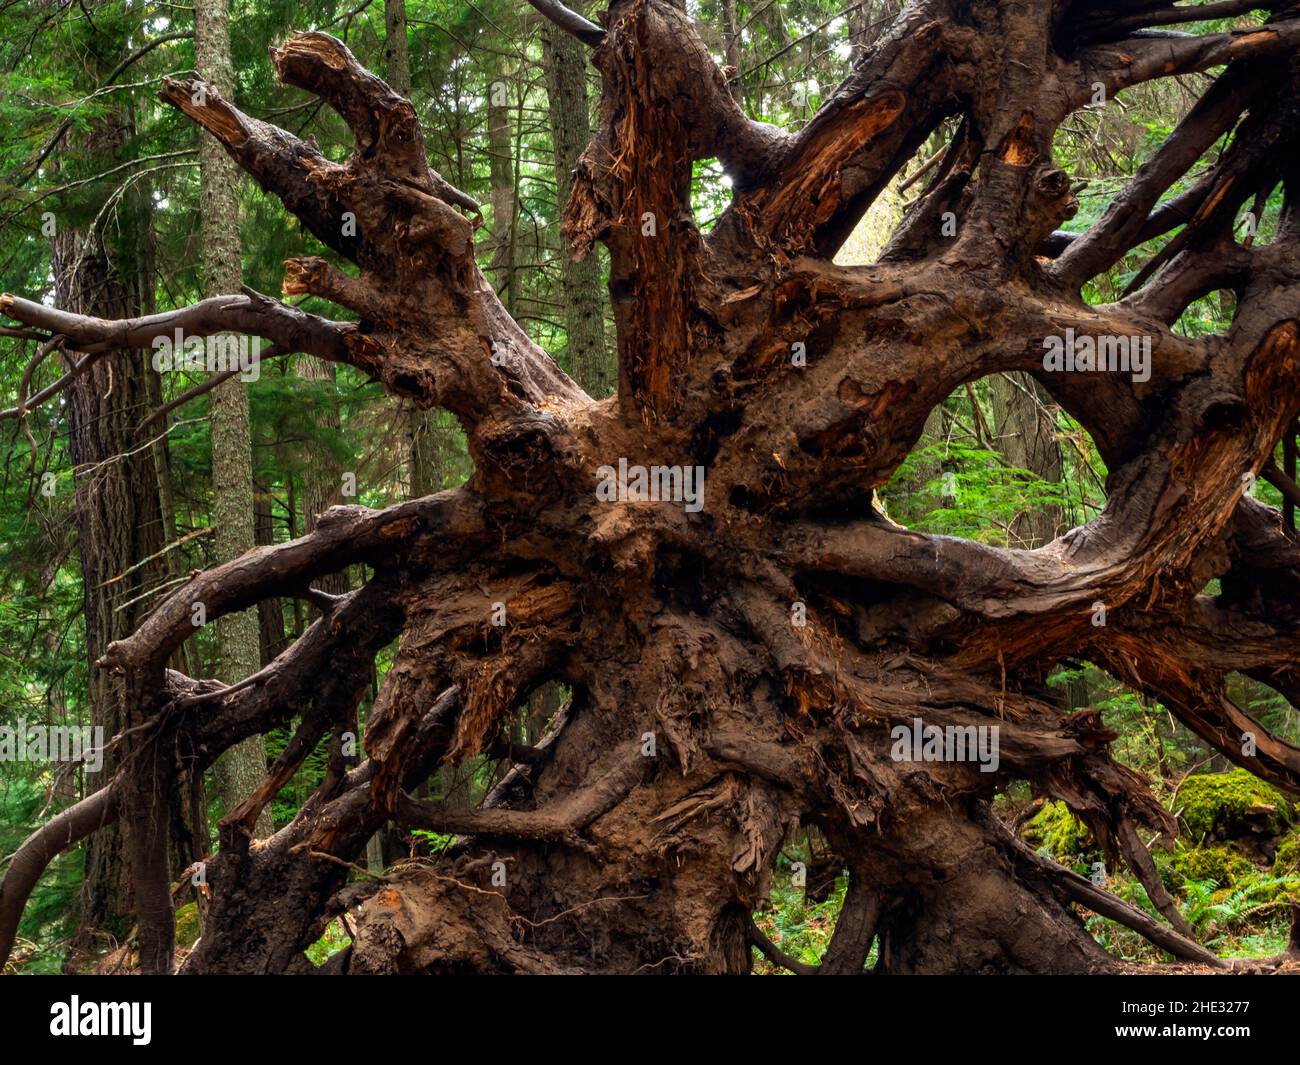 WA21020-00...WASHINGTON - A complicated root ball located along the Cascade Creek trail in Moran State Park on Orcas Island. Stock Photo